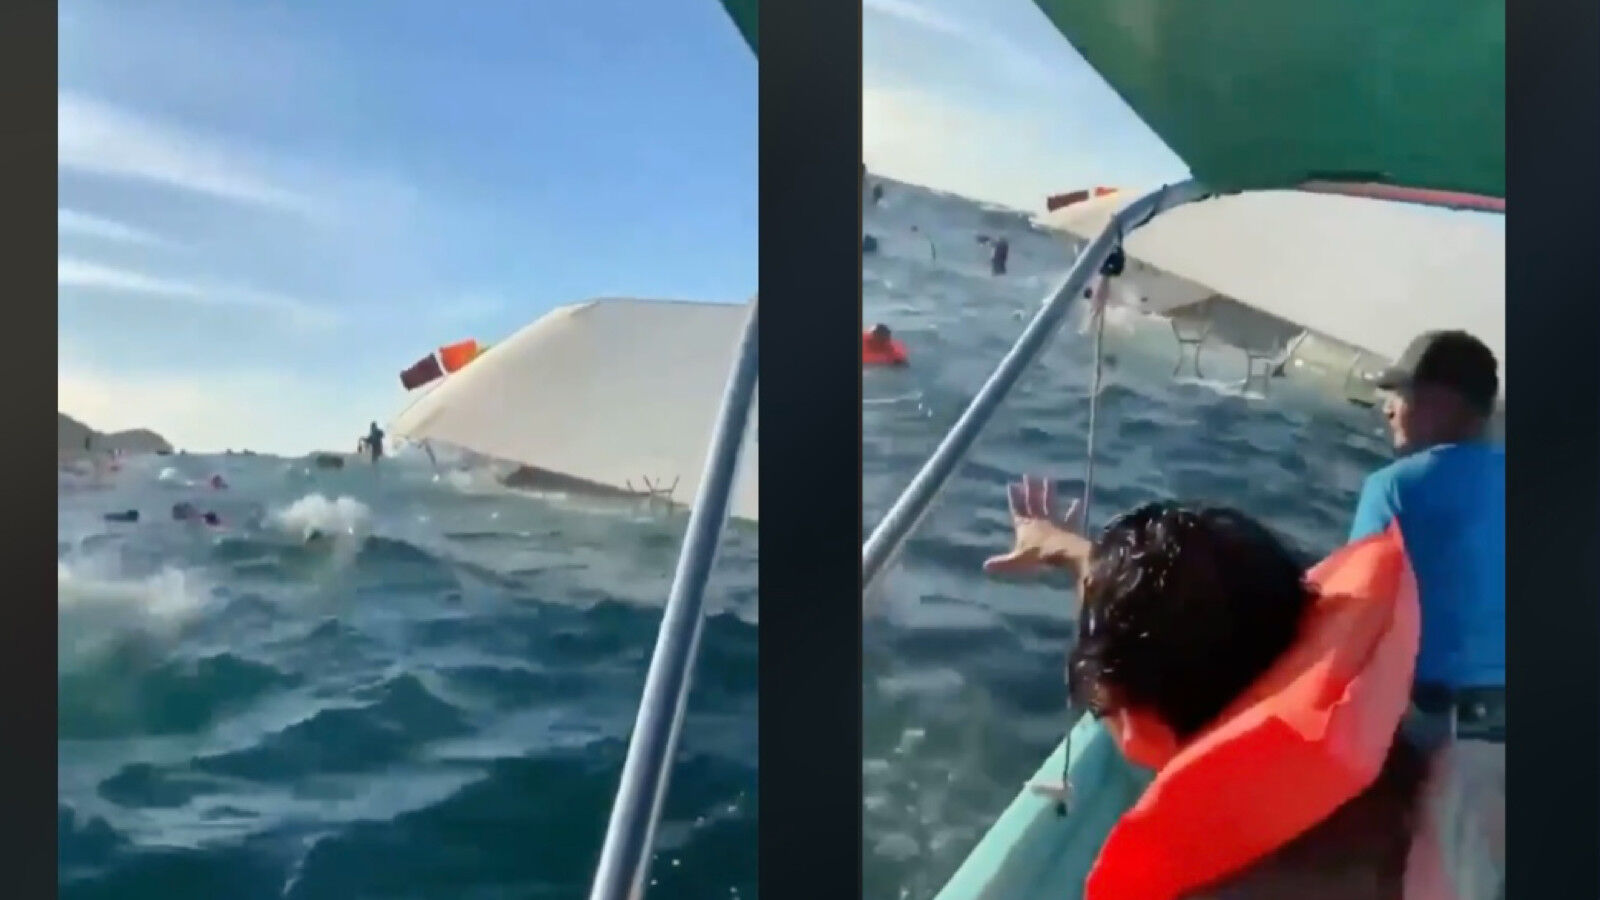 The scene around the "PV Delice" as it began to capsize off the coast of Puerto Vallarta.